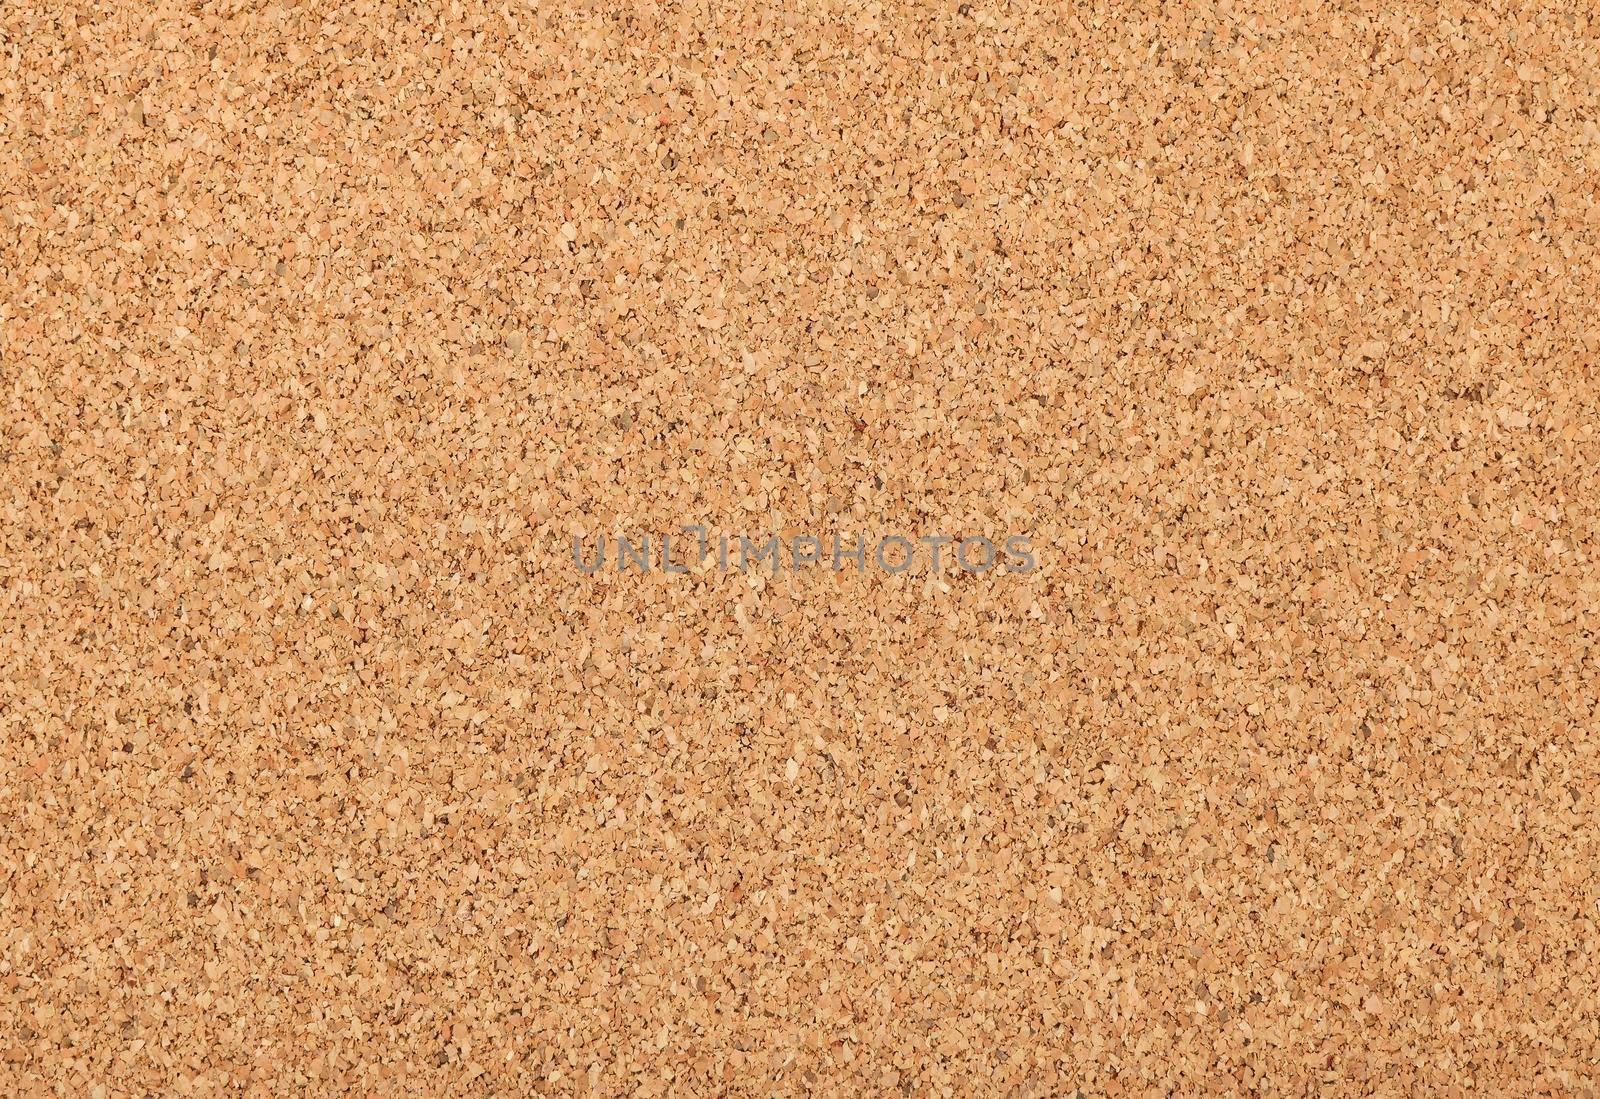 Close up background texture of unpainted natural brown cork board or plate, thermal insulating or interior sheet material also used for pin board